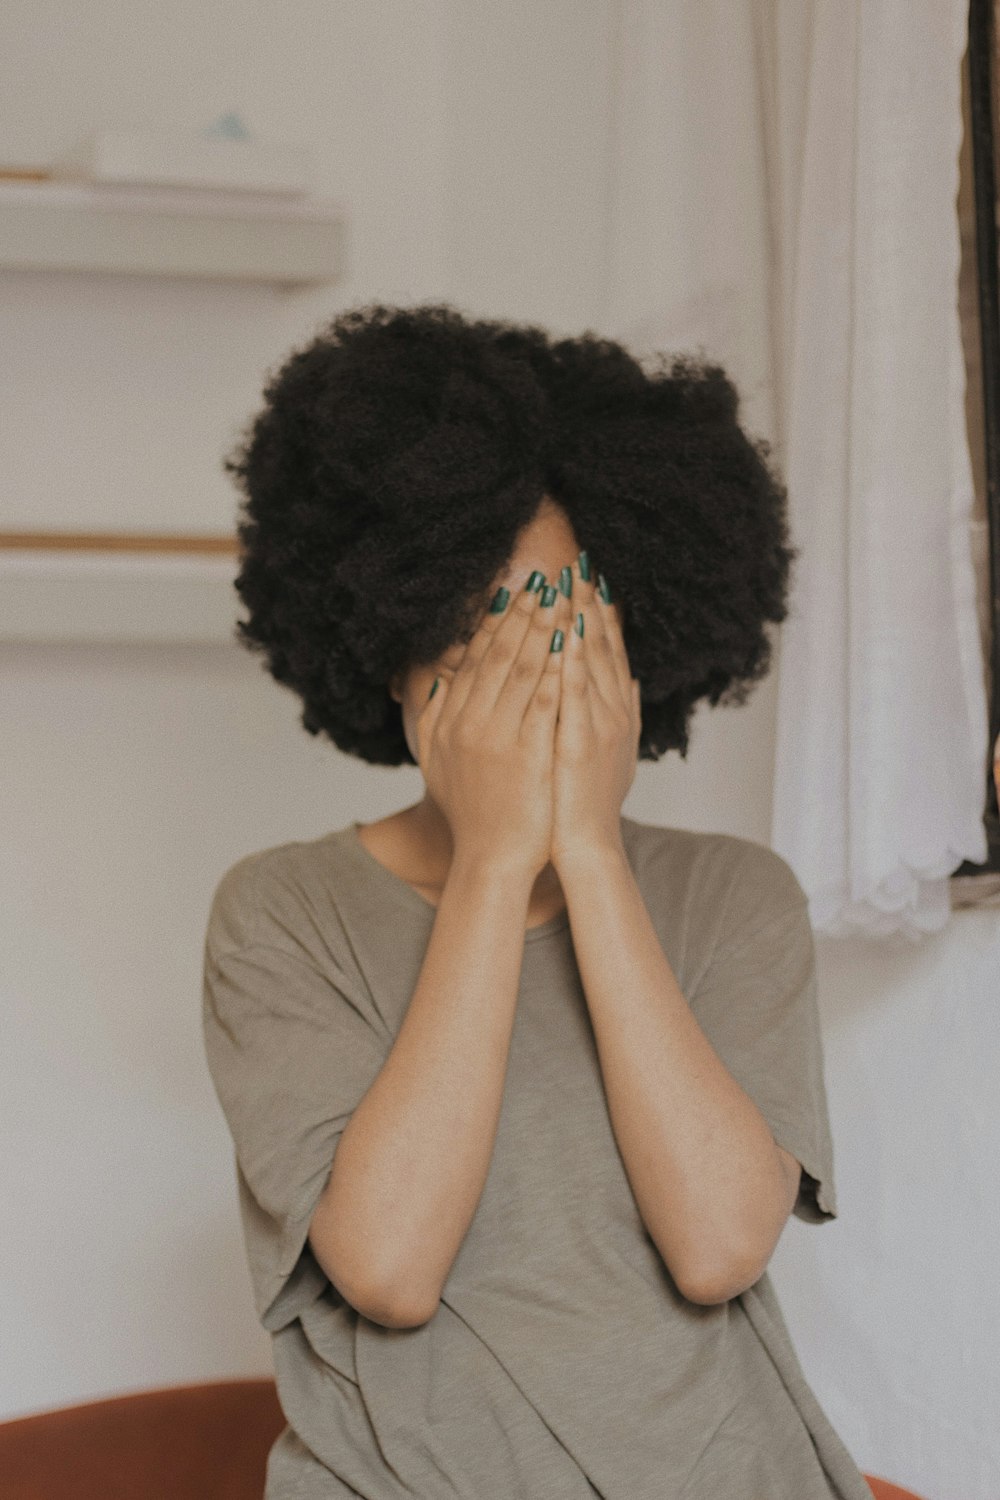 woman in gray t-shirt covering face with both hands